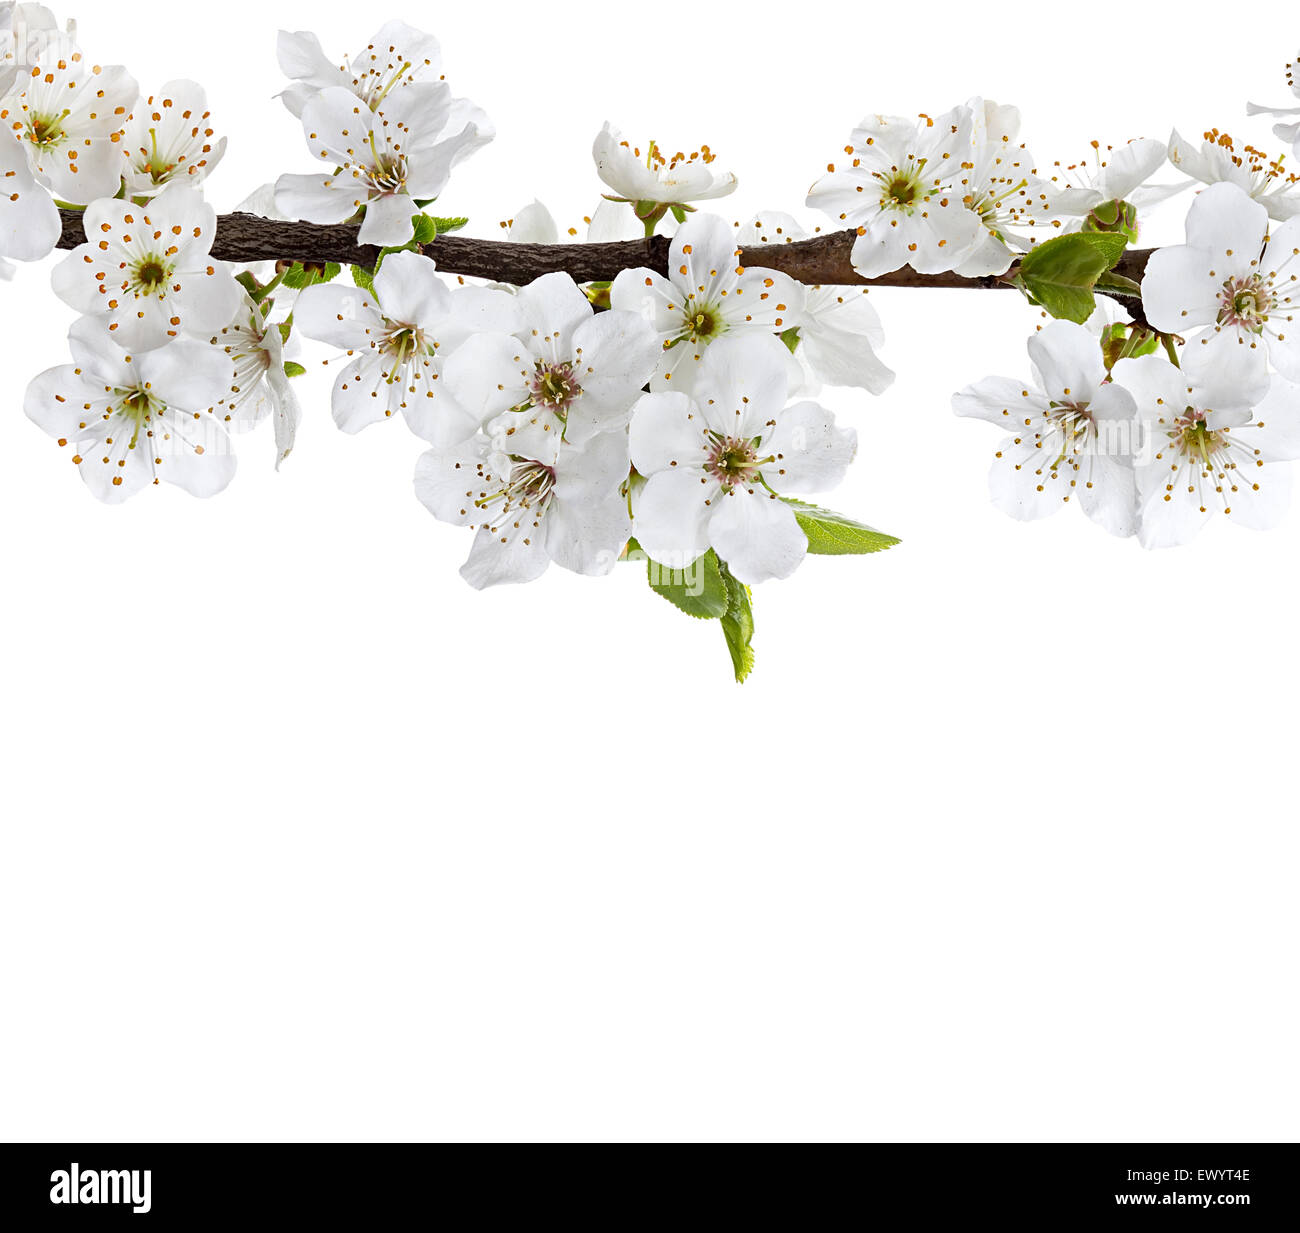 Flowering apple blossom branches Stock Photo